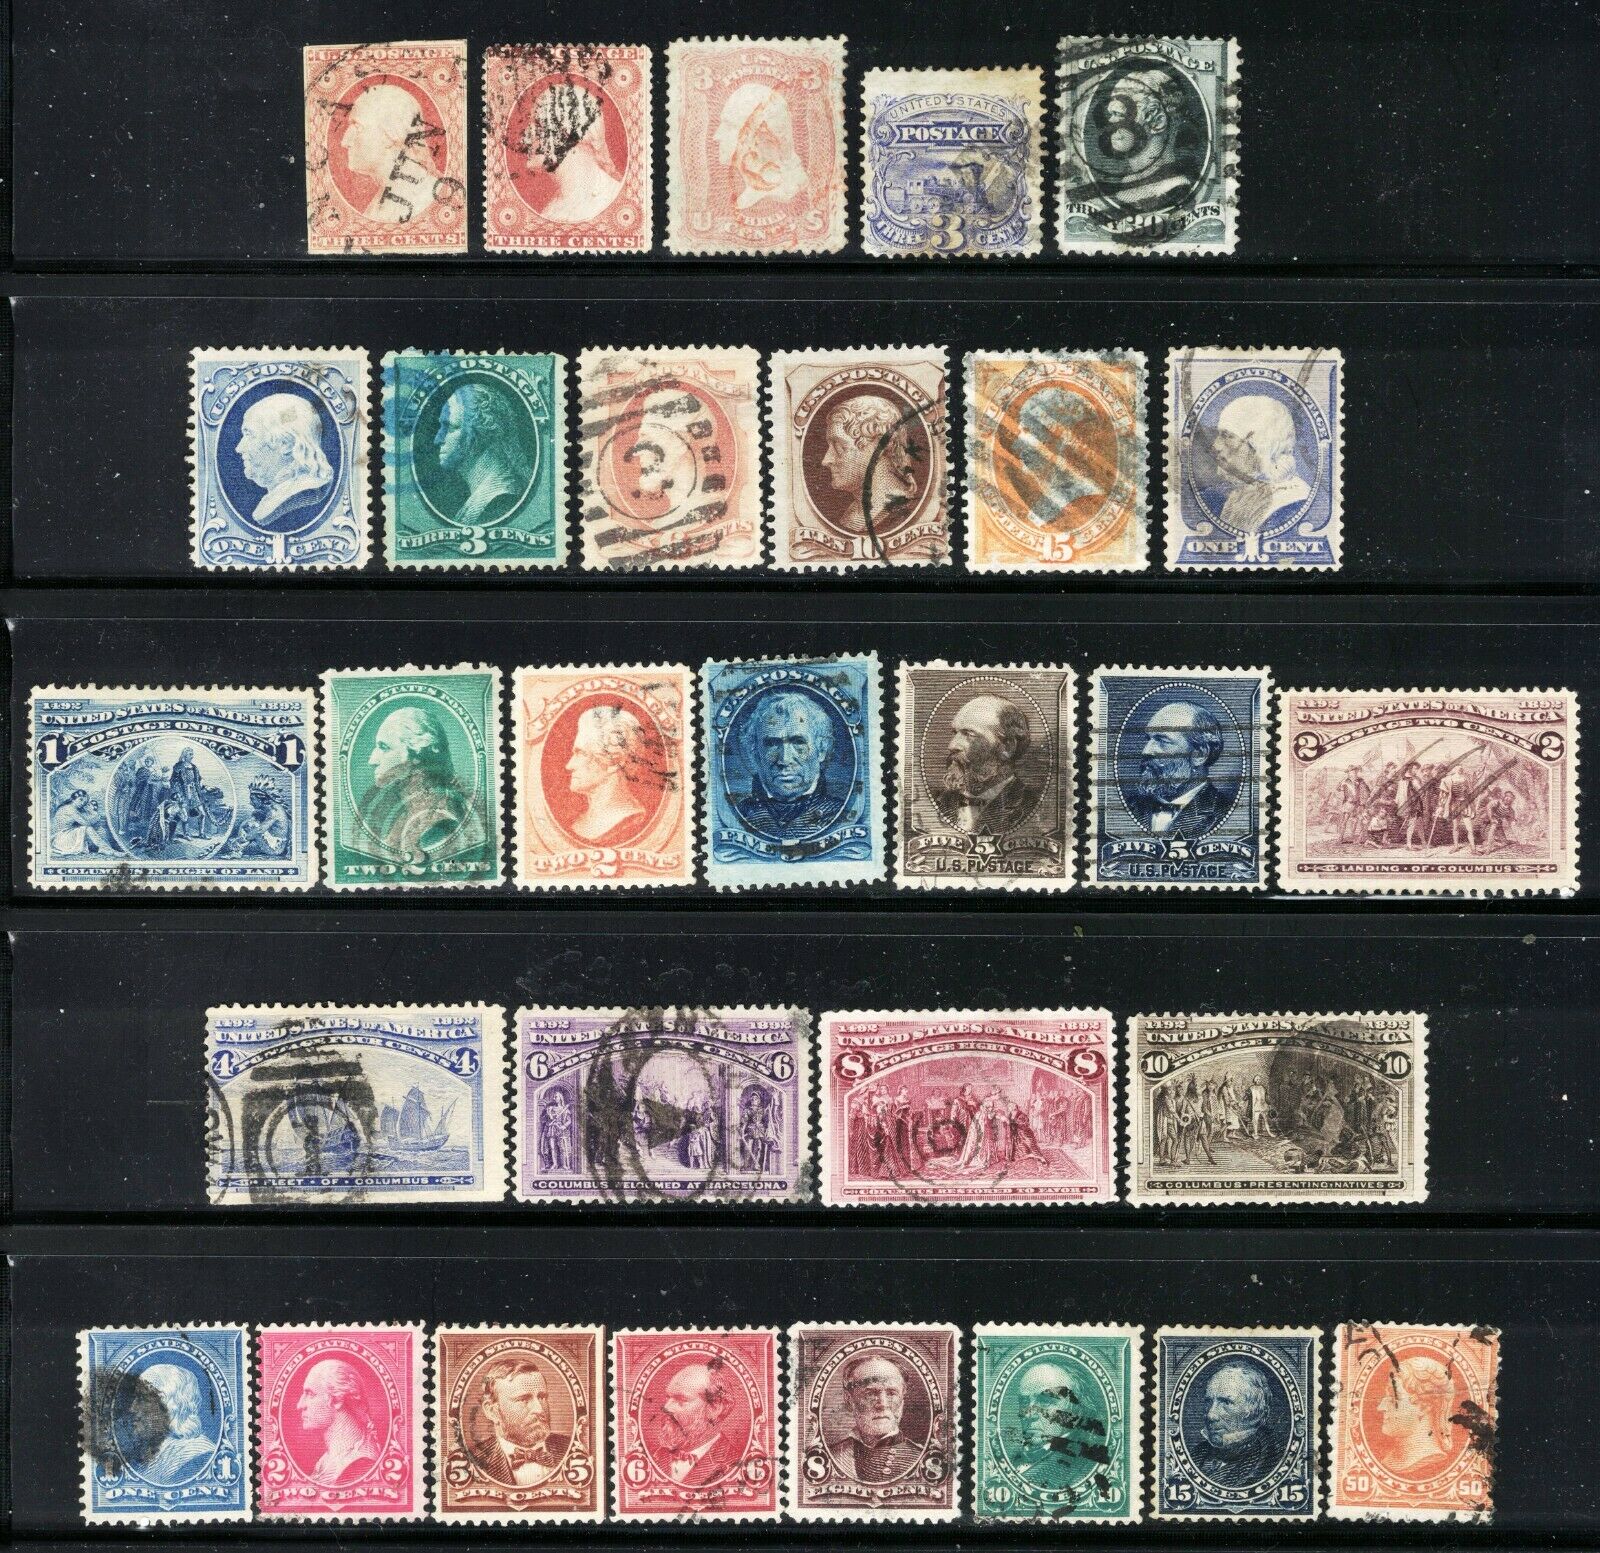 U.s. Nice Lot Of 30 Different Old Stamps From The 1850's Up Through The 1890's